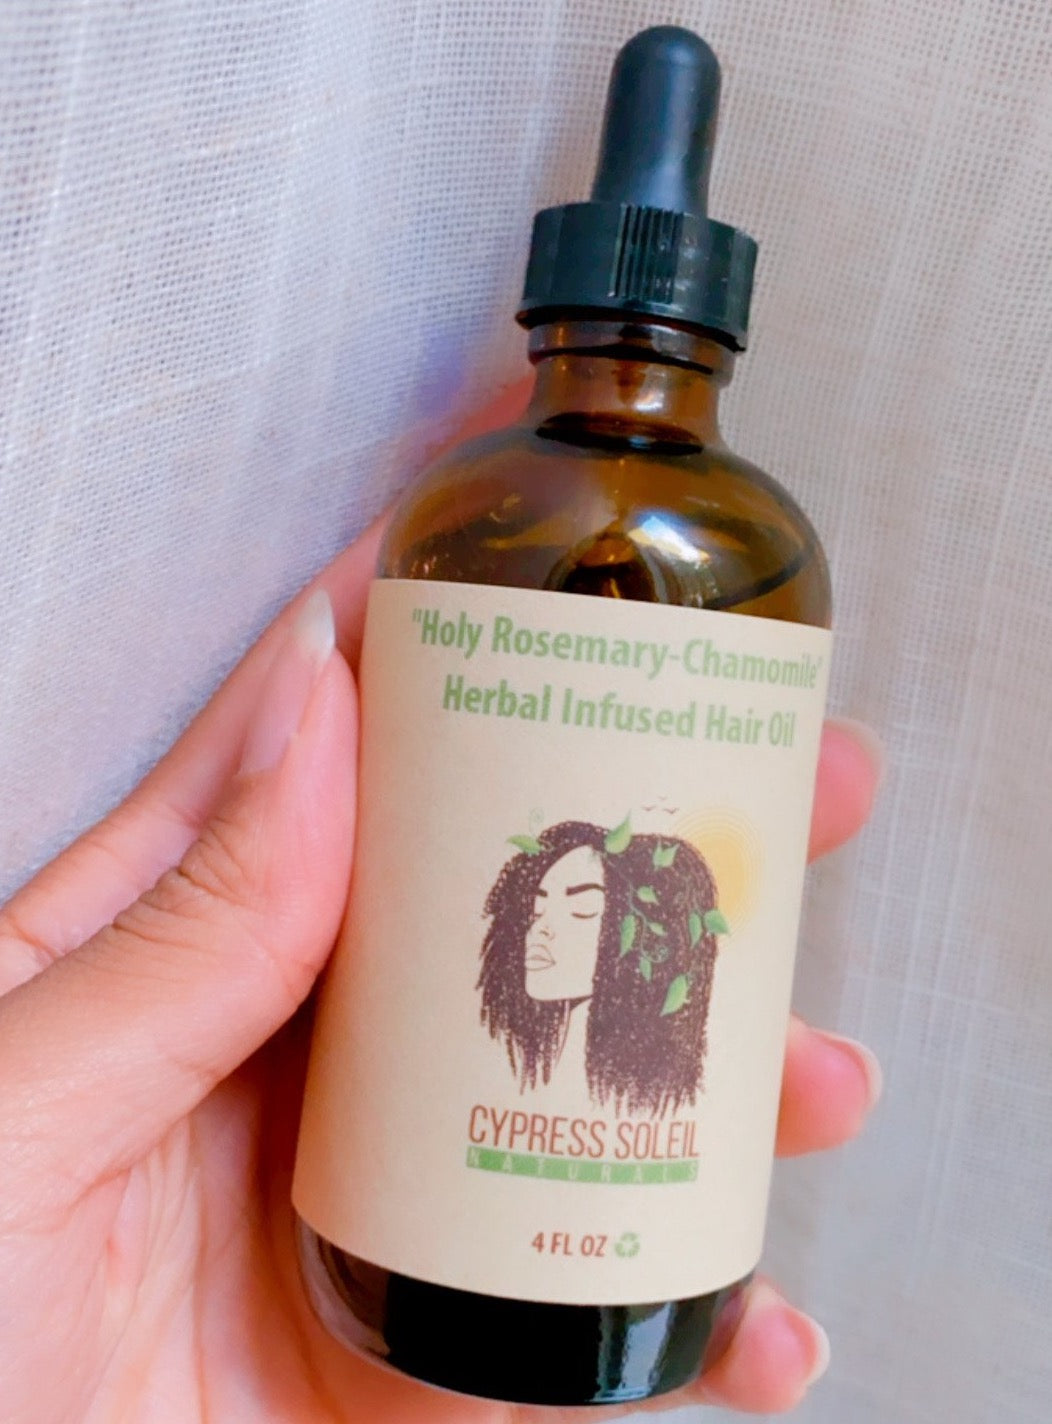 "Holy Rosemary-Chamomile" Herbal Infused Hair Growth Oil